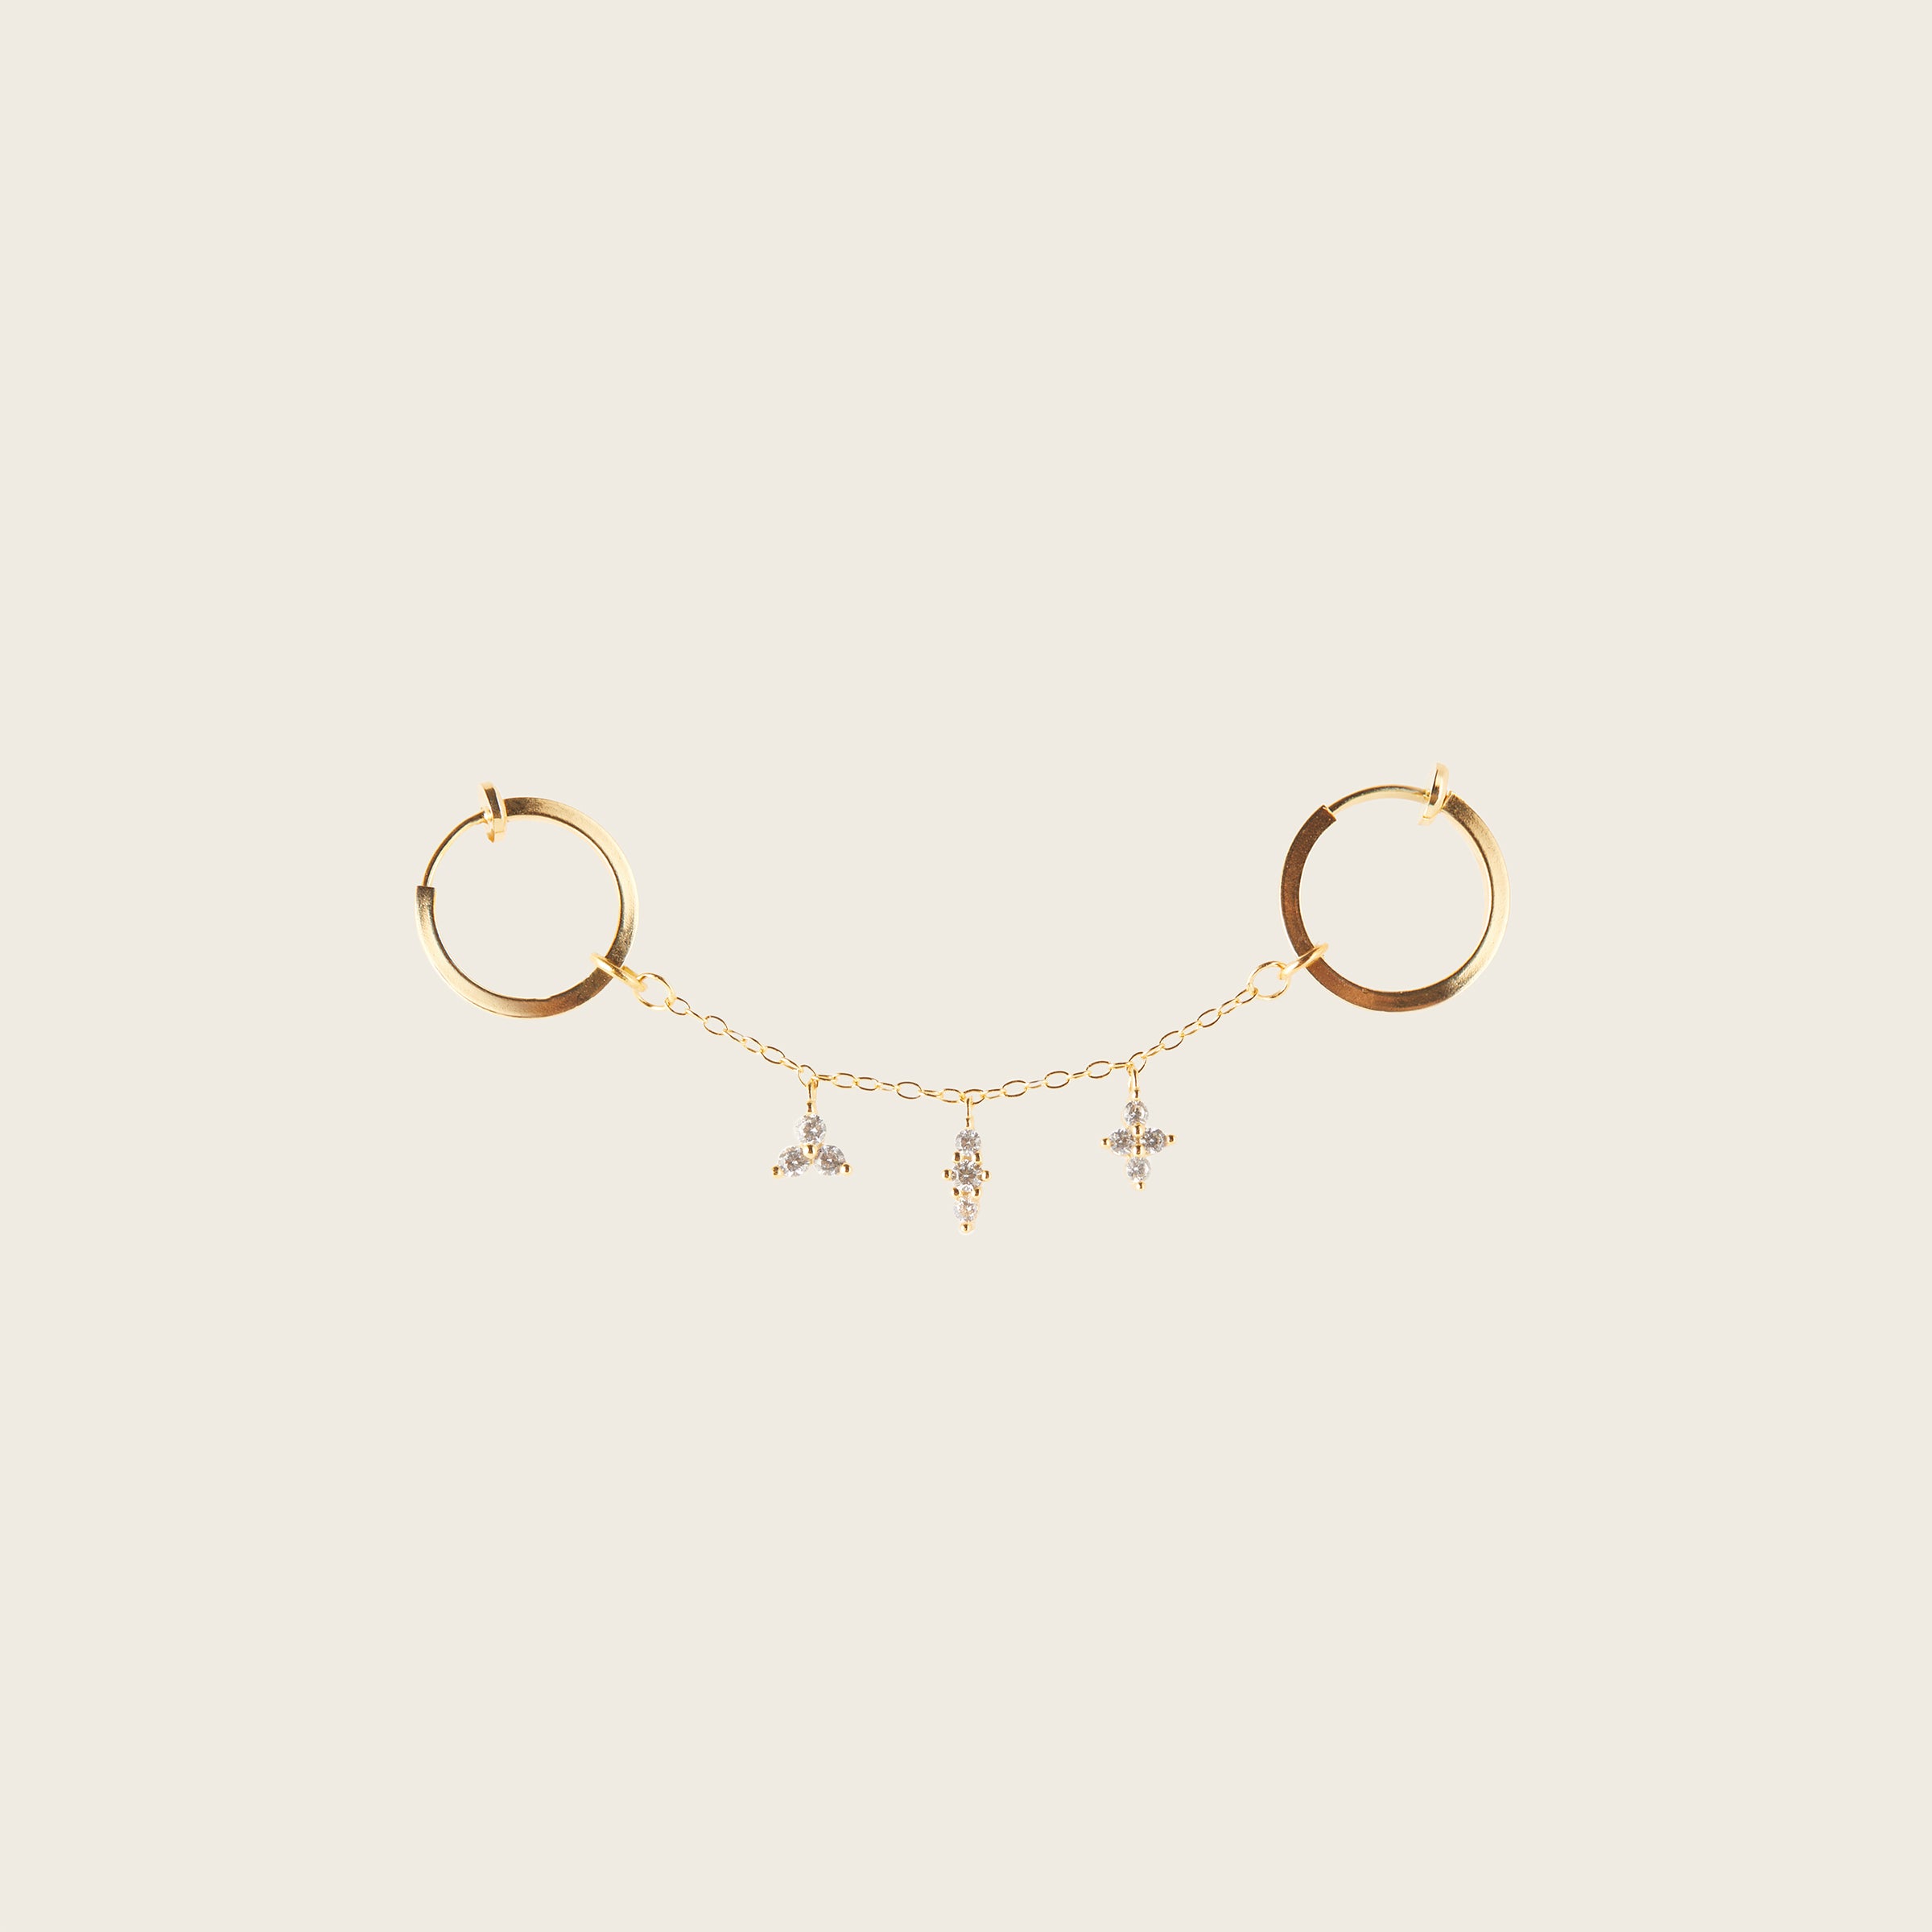 Image of the Single Triple Charm Hoop Chain in Gold are made with high-quality materials, including 18K gold plating over 925 Sterling Silver. These charms are both non-tarnish and water resistant. The perfect combination of style and durability.